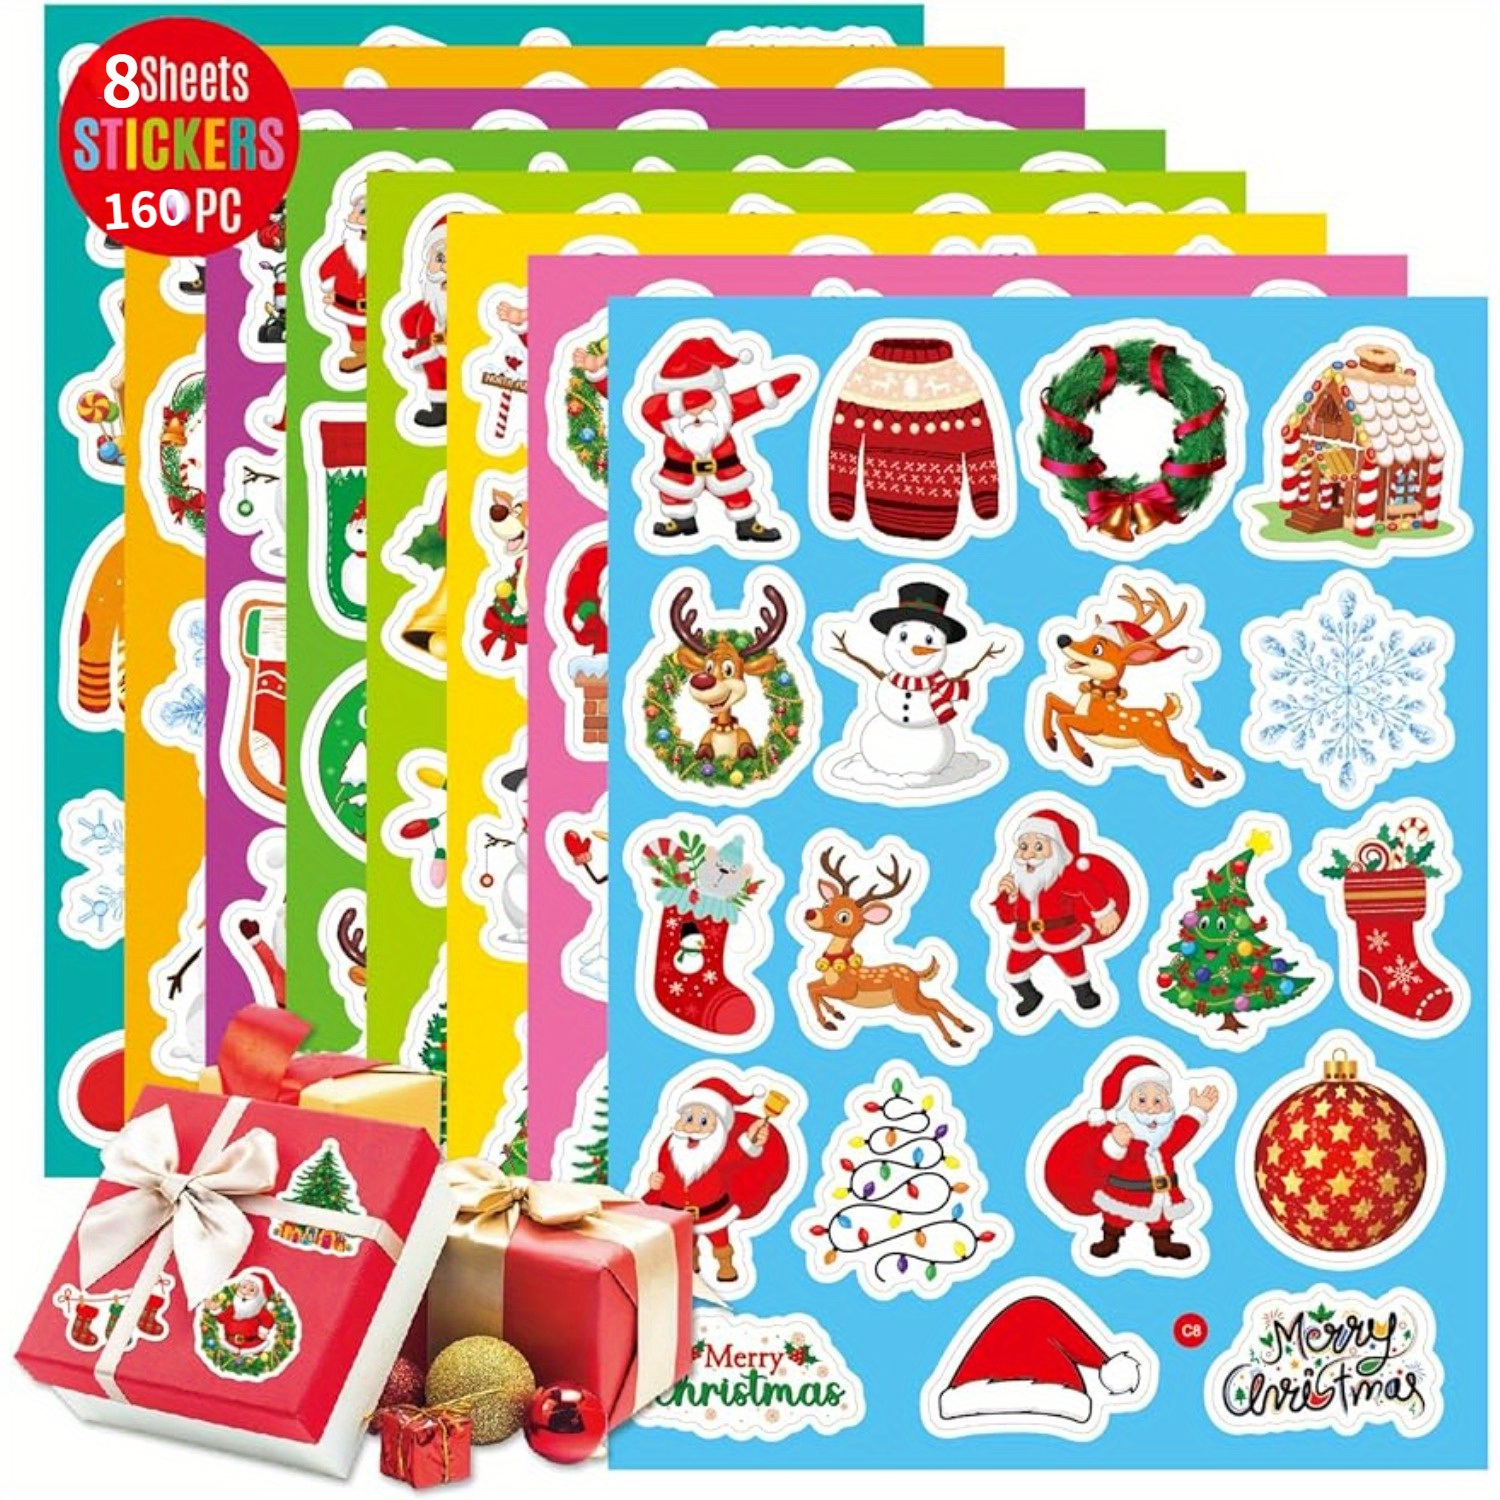 160pcs Holiday Stickers 2023 Christmas Theme Stickers For Kids Santa Claus  Stocking Stickers Christmas Ornament Stickers Bulk Pack Party Gifts For Adu